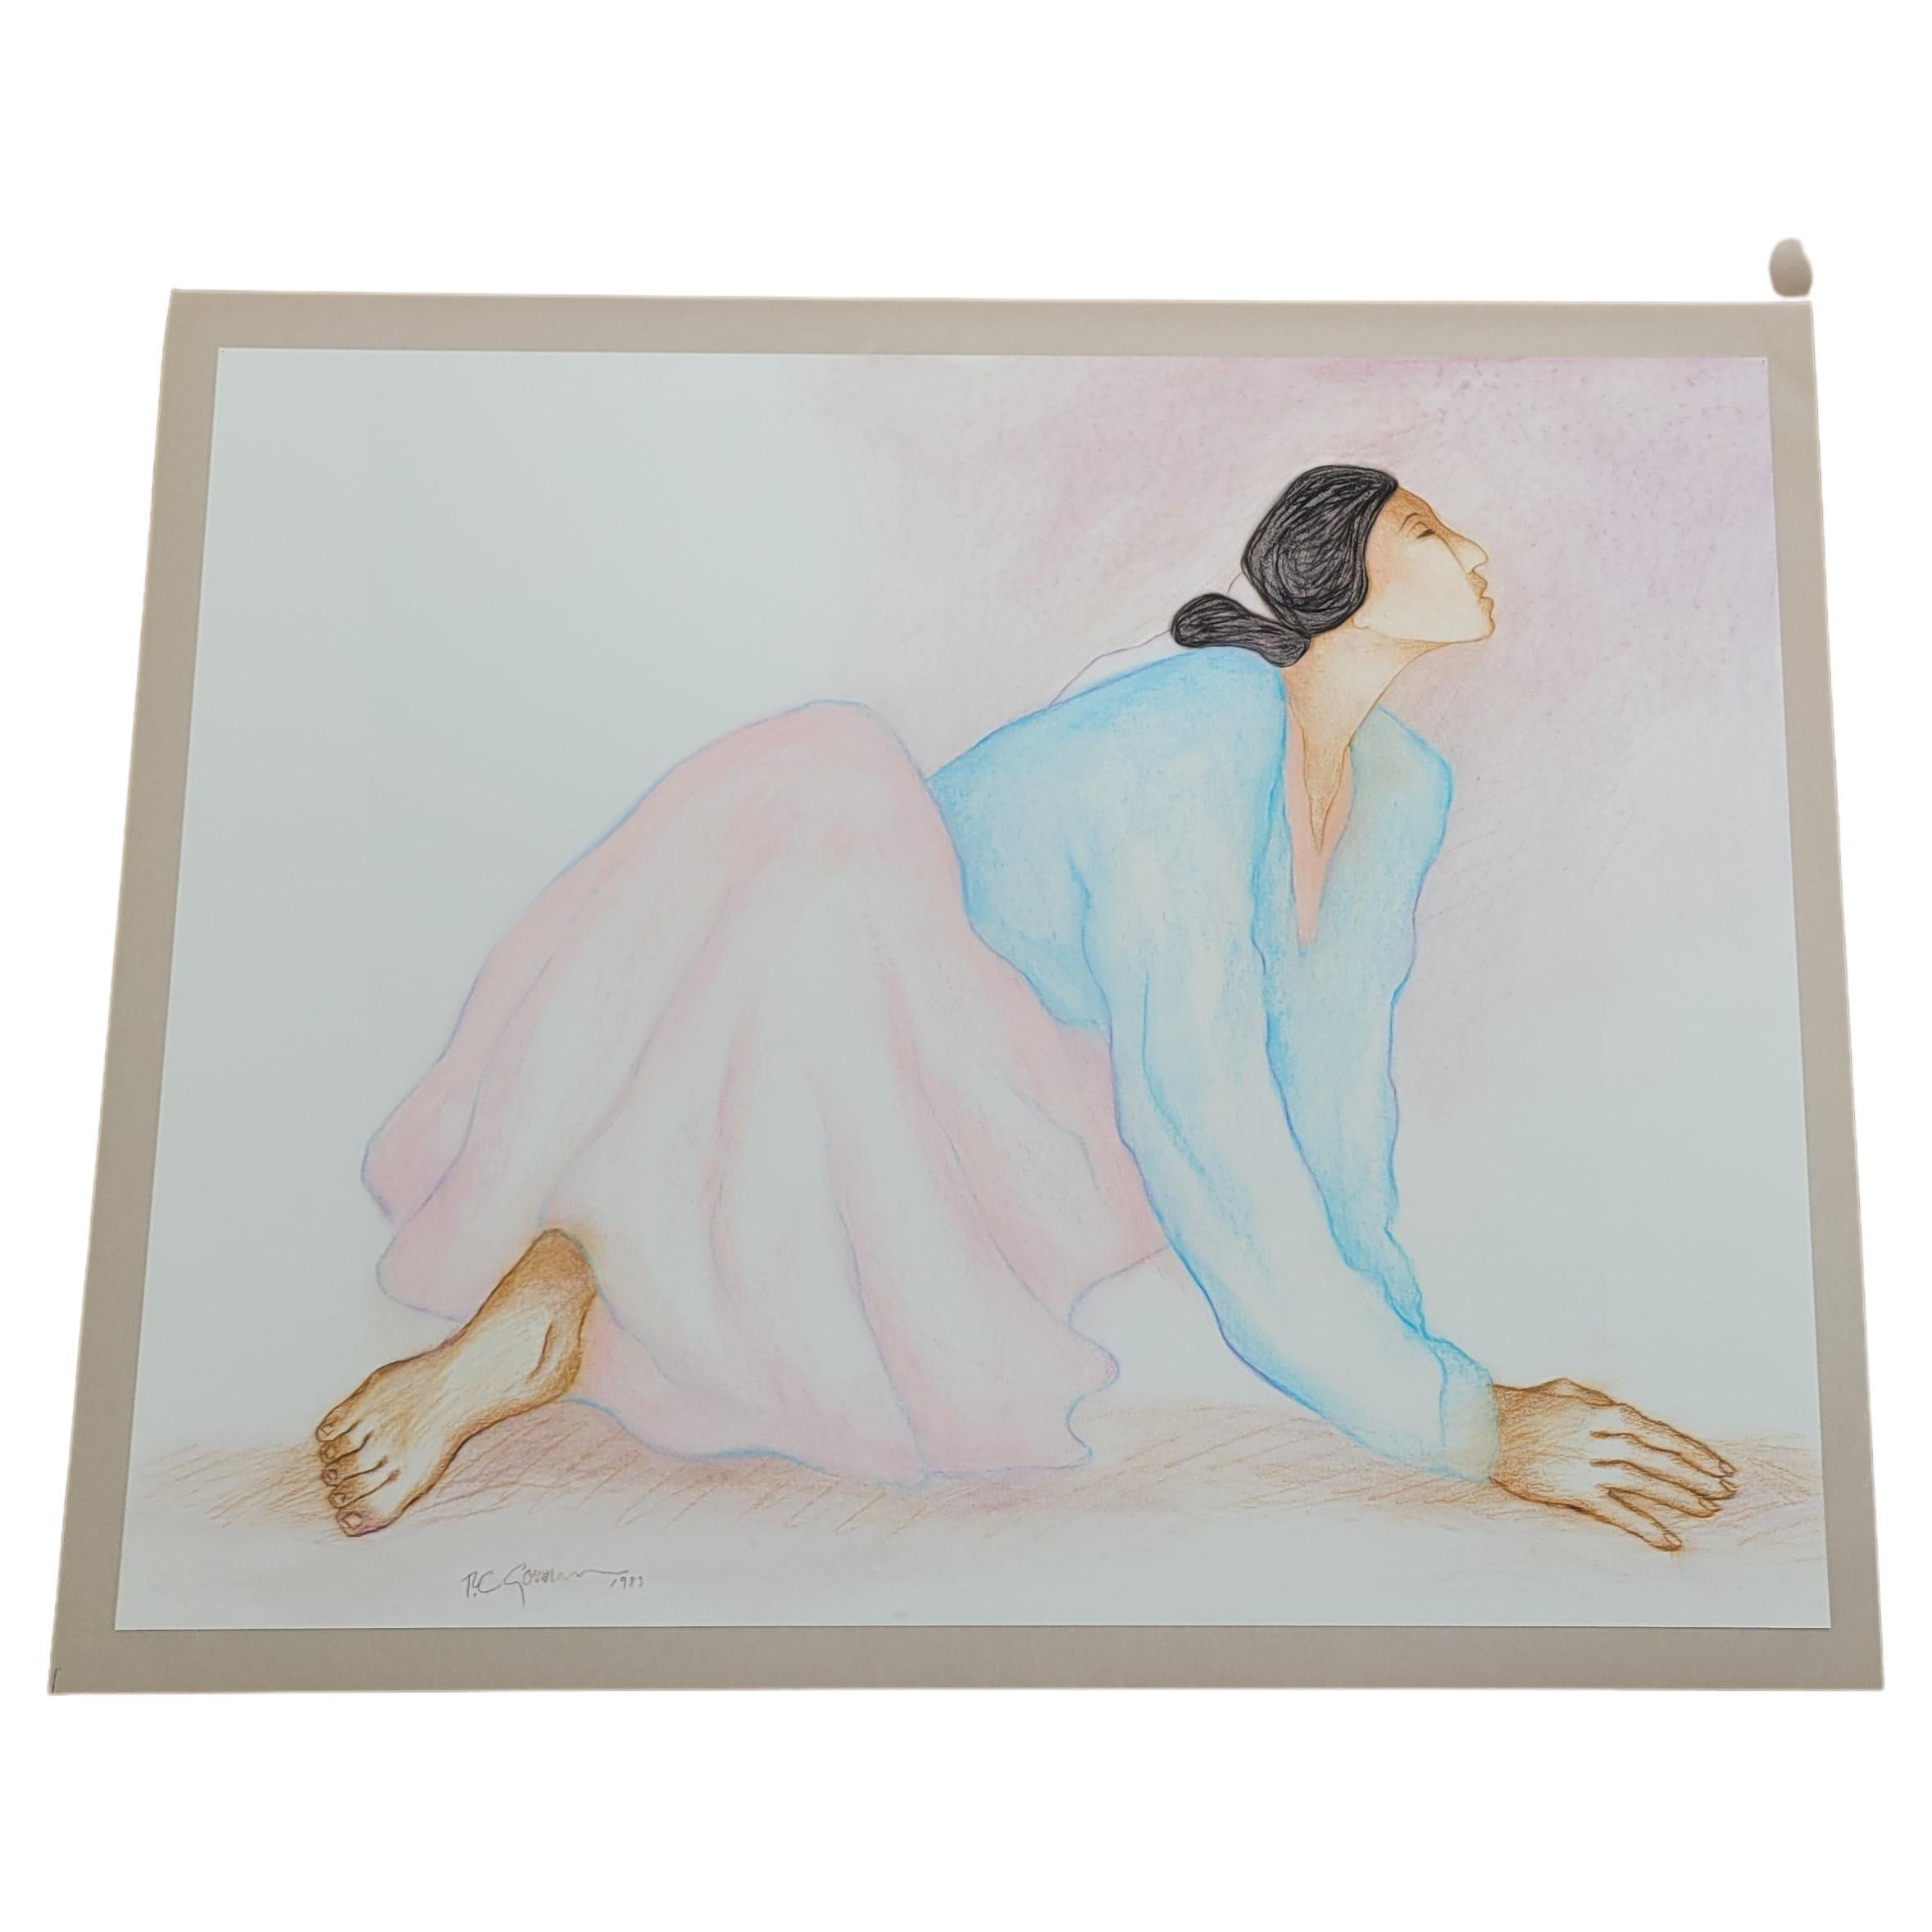 Woman with Pink Skirt and Light Blue Blouse - 1983

This is an original pastel by R.C. Gorman.  This piece is unframed and in its original protective slip.

Measurements are height 23 inches, width 29 inches.  Depth is not applicable as this is